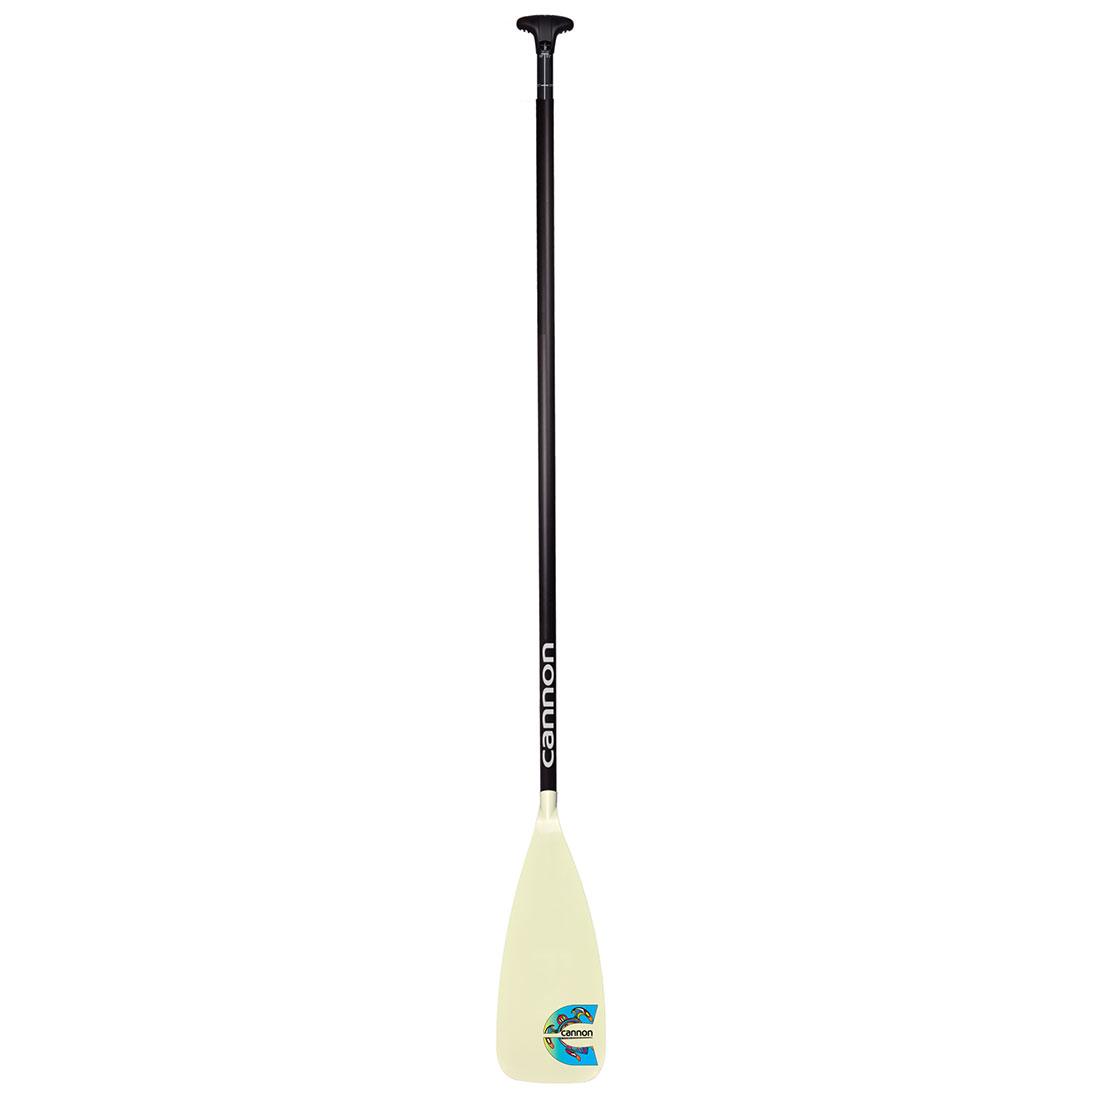 Cannon Rally LeverLock SUP Paddle